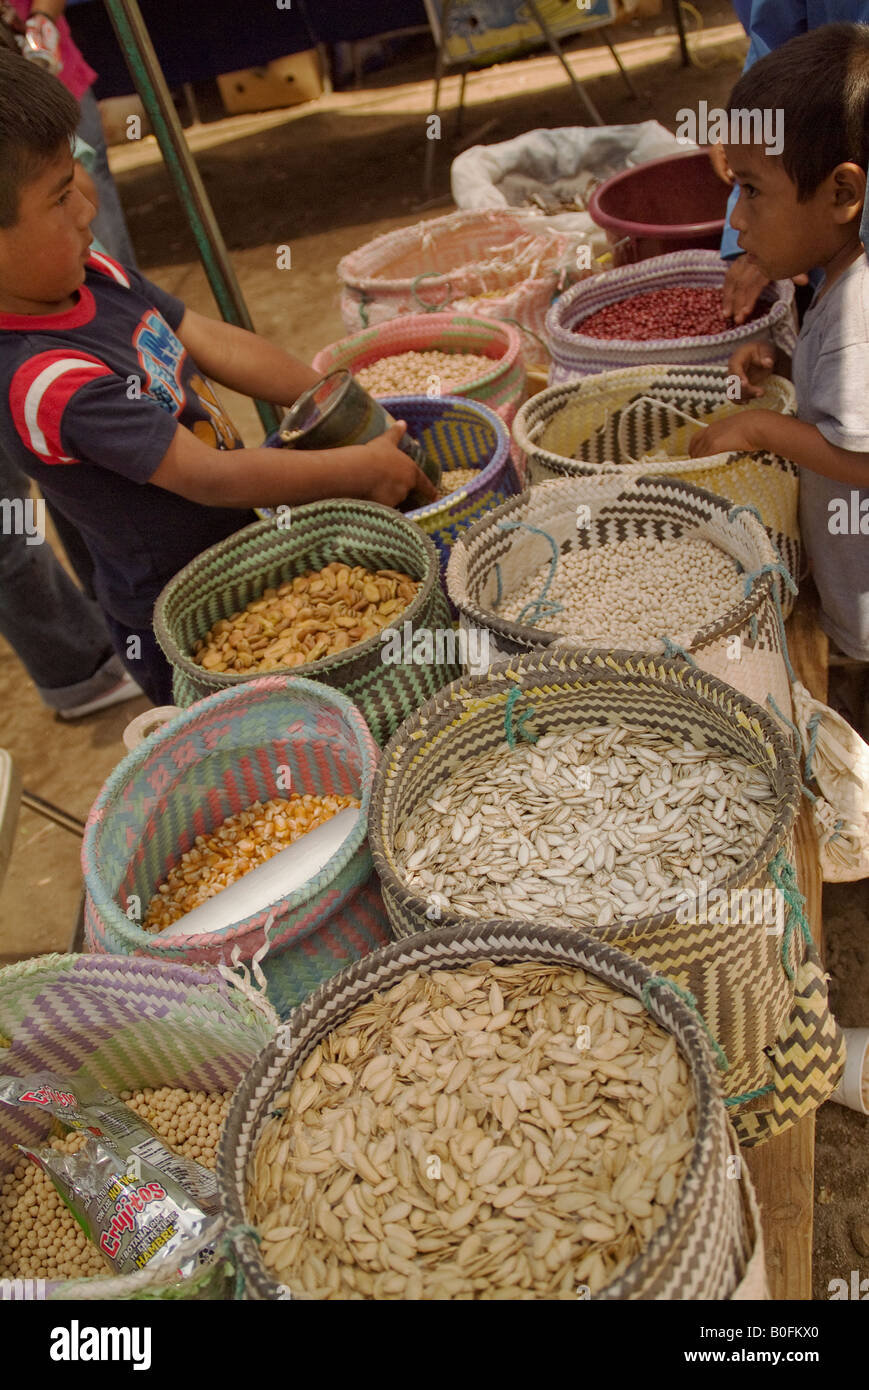 Colorful baskets of beans and grains with two children learning the trade. Market in Baja California Norte, Mexico Stock Photo